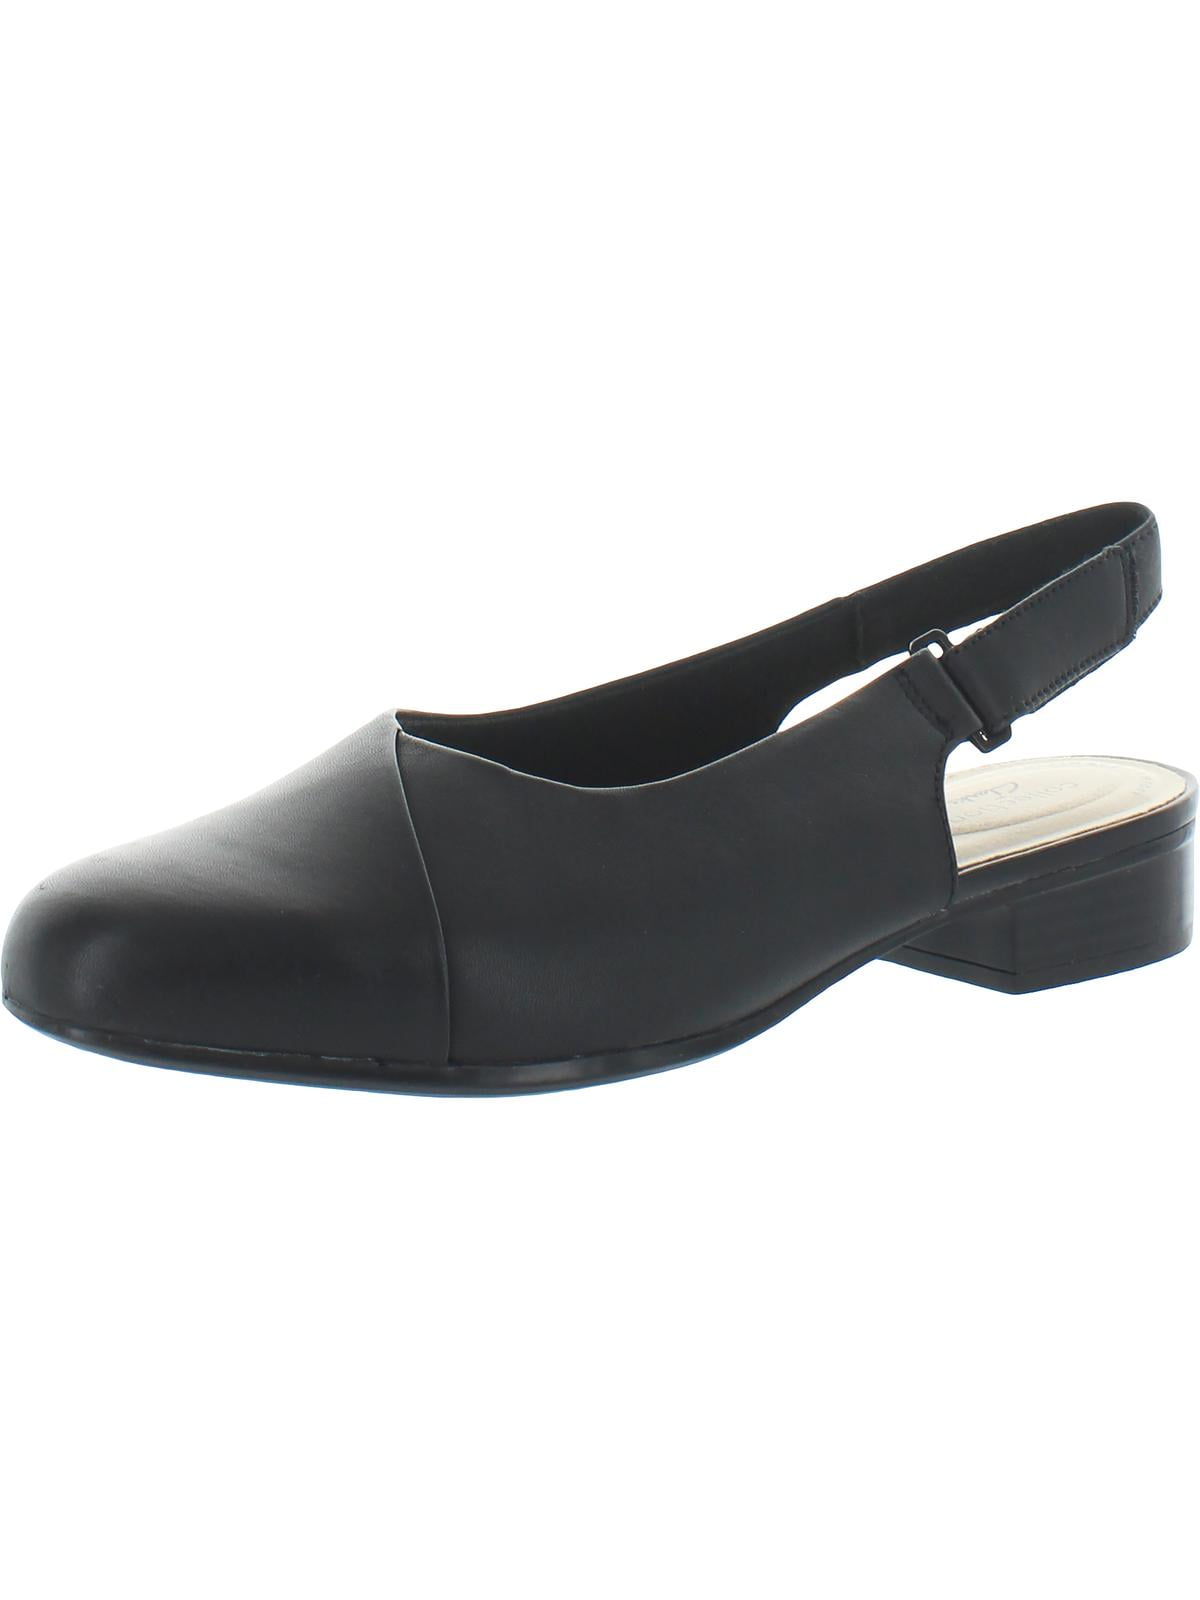 Details about   JULIET PULL LADIES CLARKS WORK FORMAL LEATHER SLINGBACK BALLERINA FLAT SHOES